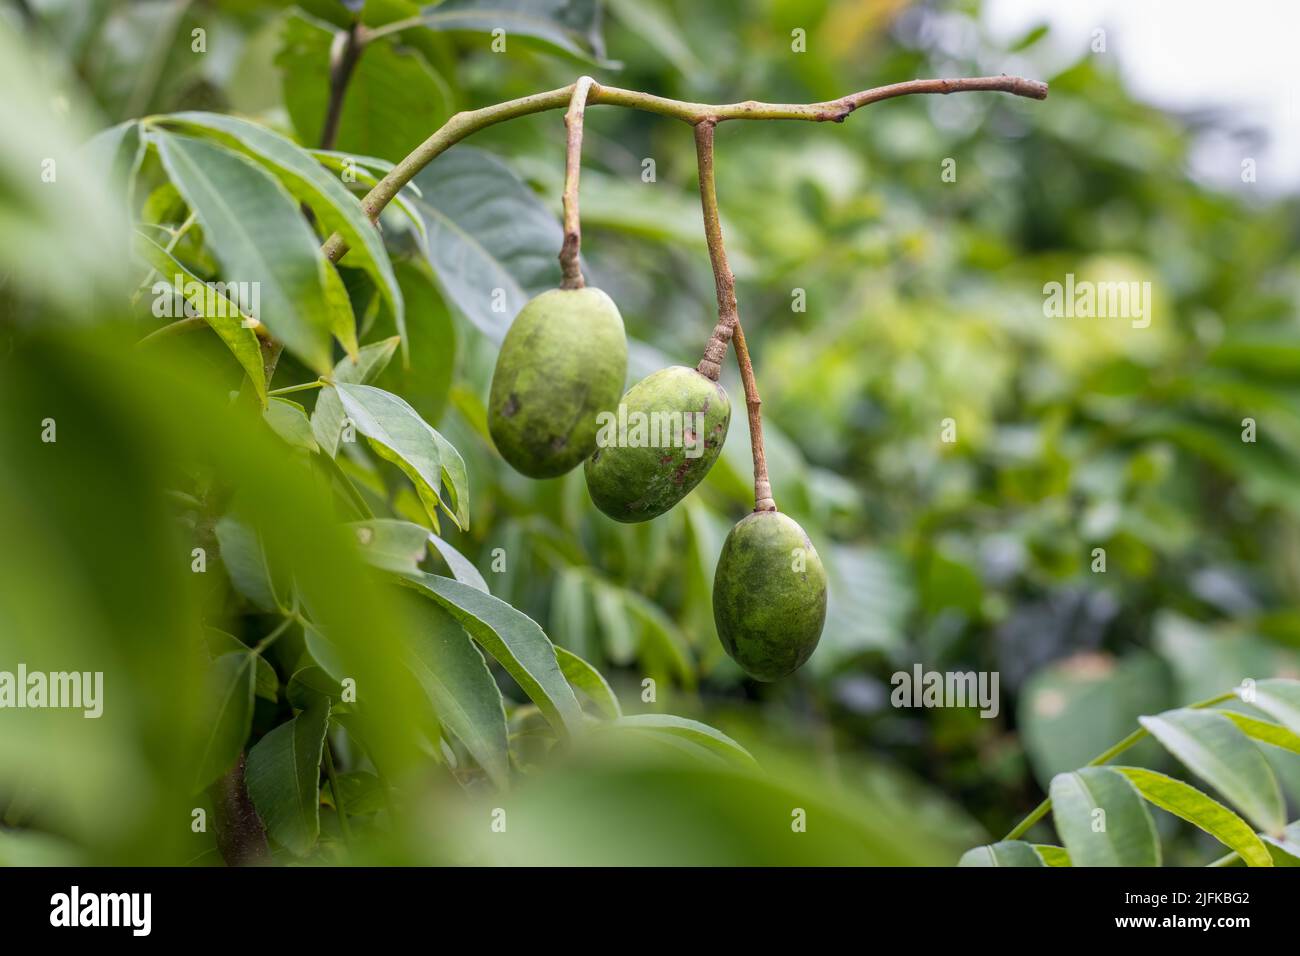 Selective focused young spondias mombin or hog plum fruit growing on the tree close up with copy space Stock Photo